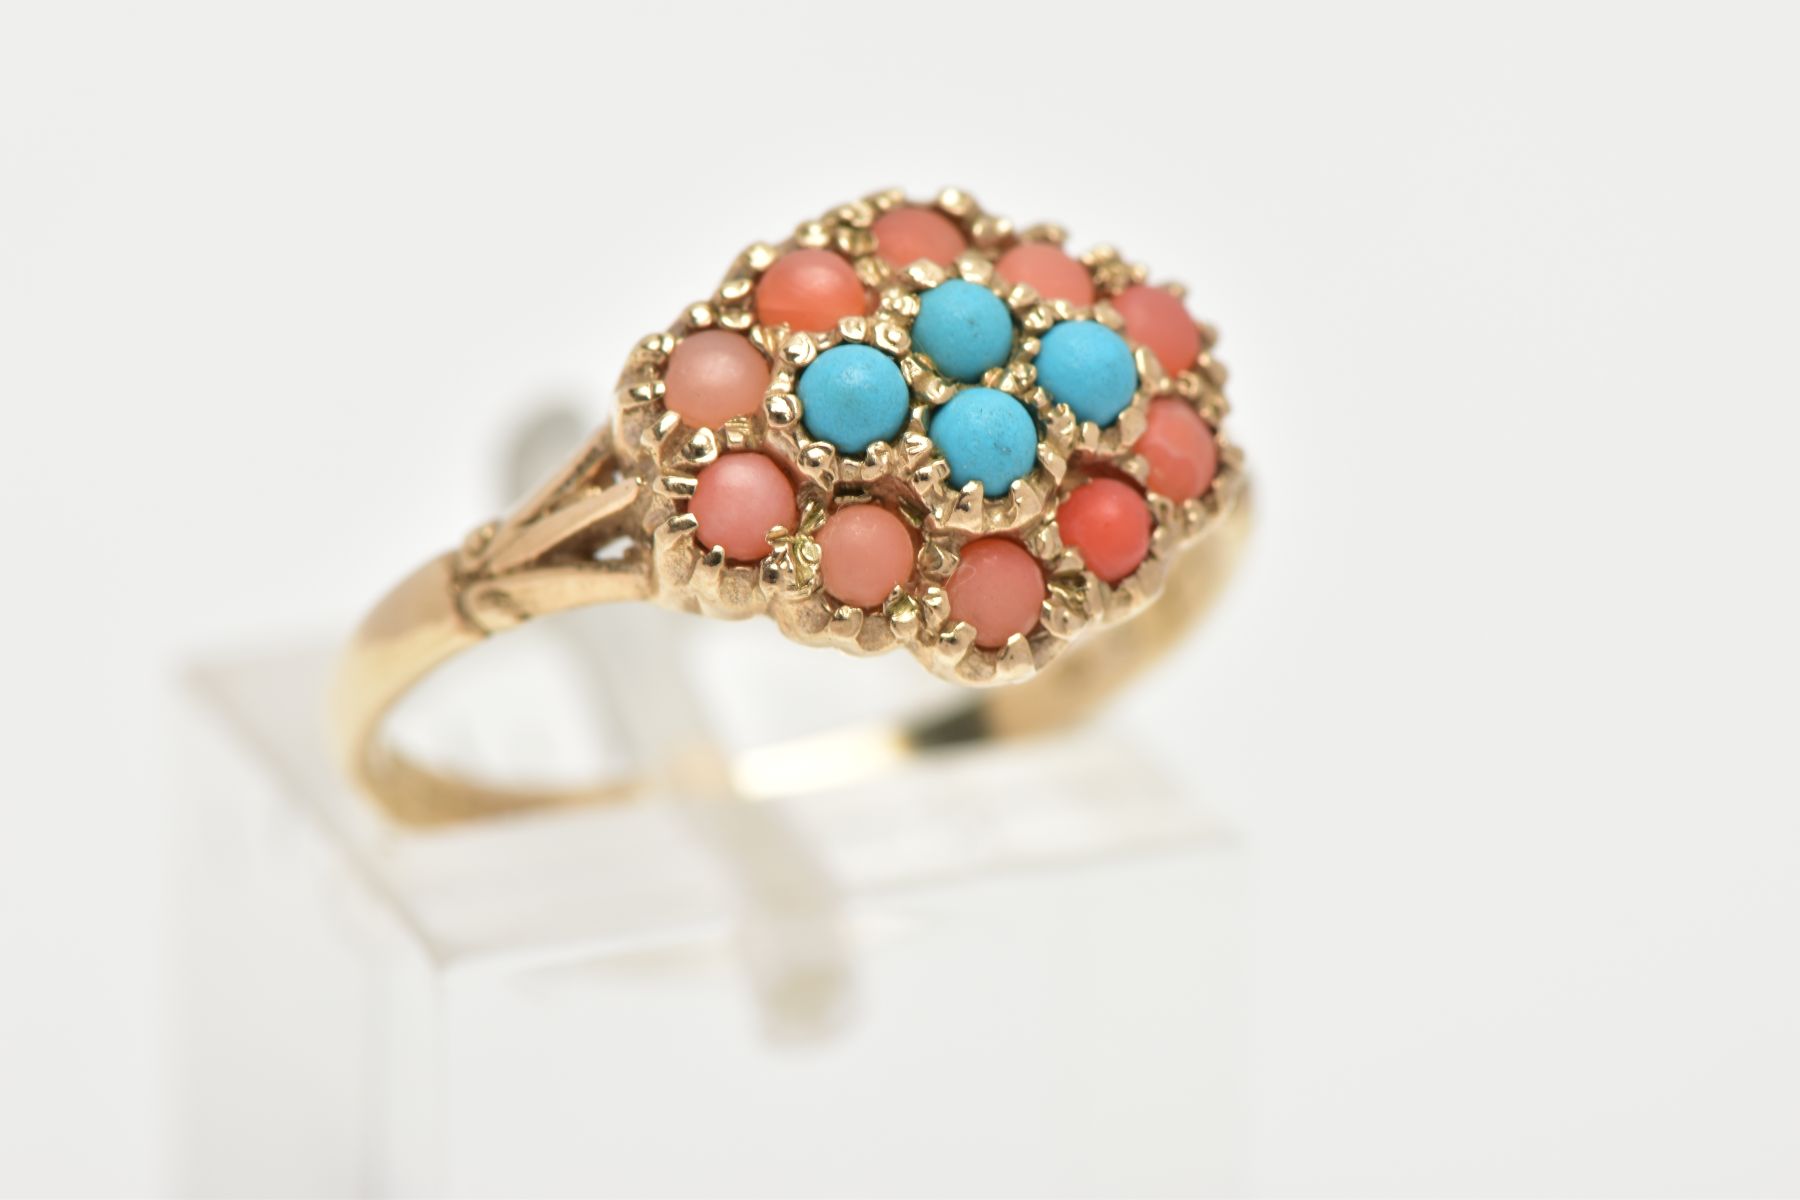 A 9CT GOLD CORAL AND TURQUOISE RING, designed as a cluster of four turquoise and twelve coral stones - Image 4 of 4